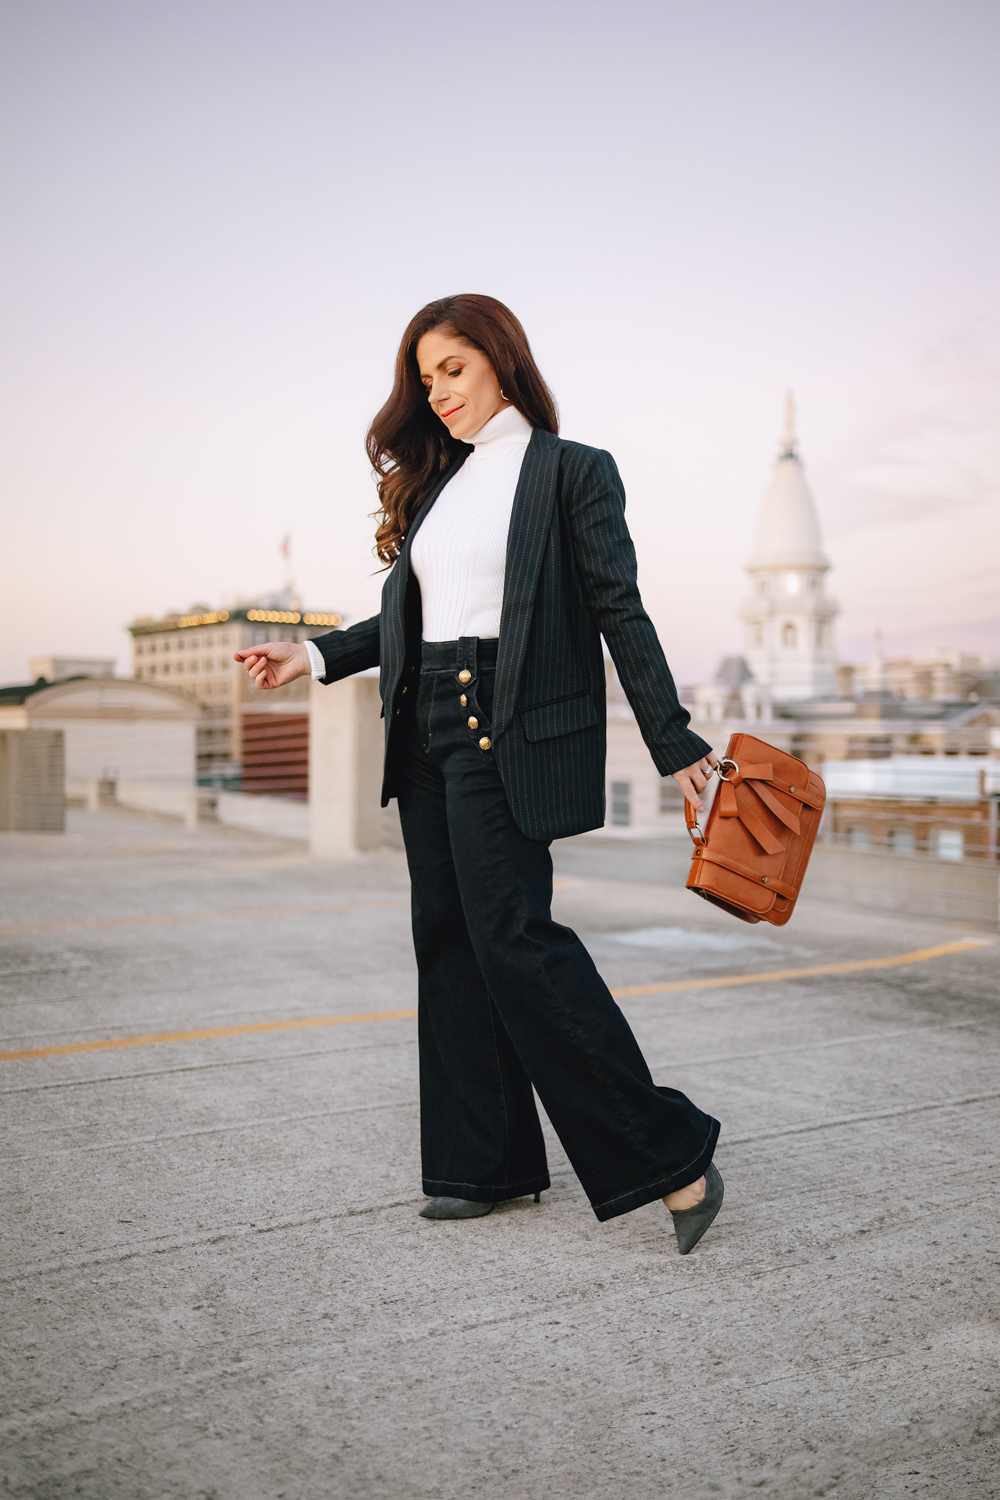 Black Turtleneck with Black Flare Pants Outfits (4 ideas & outfits